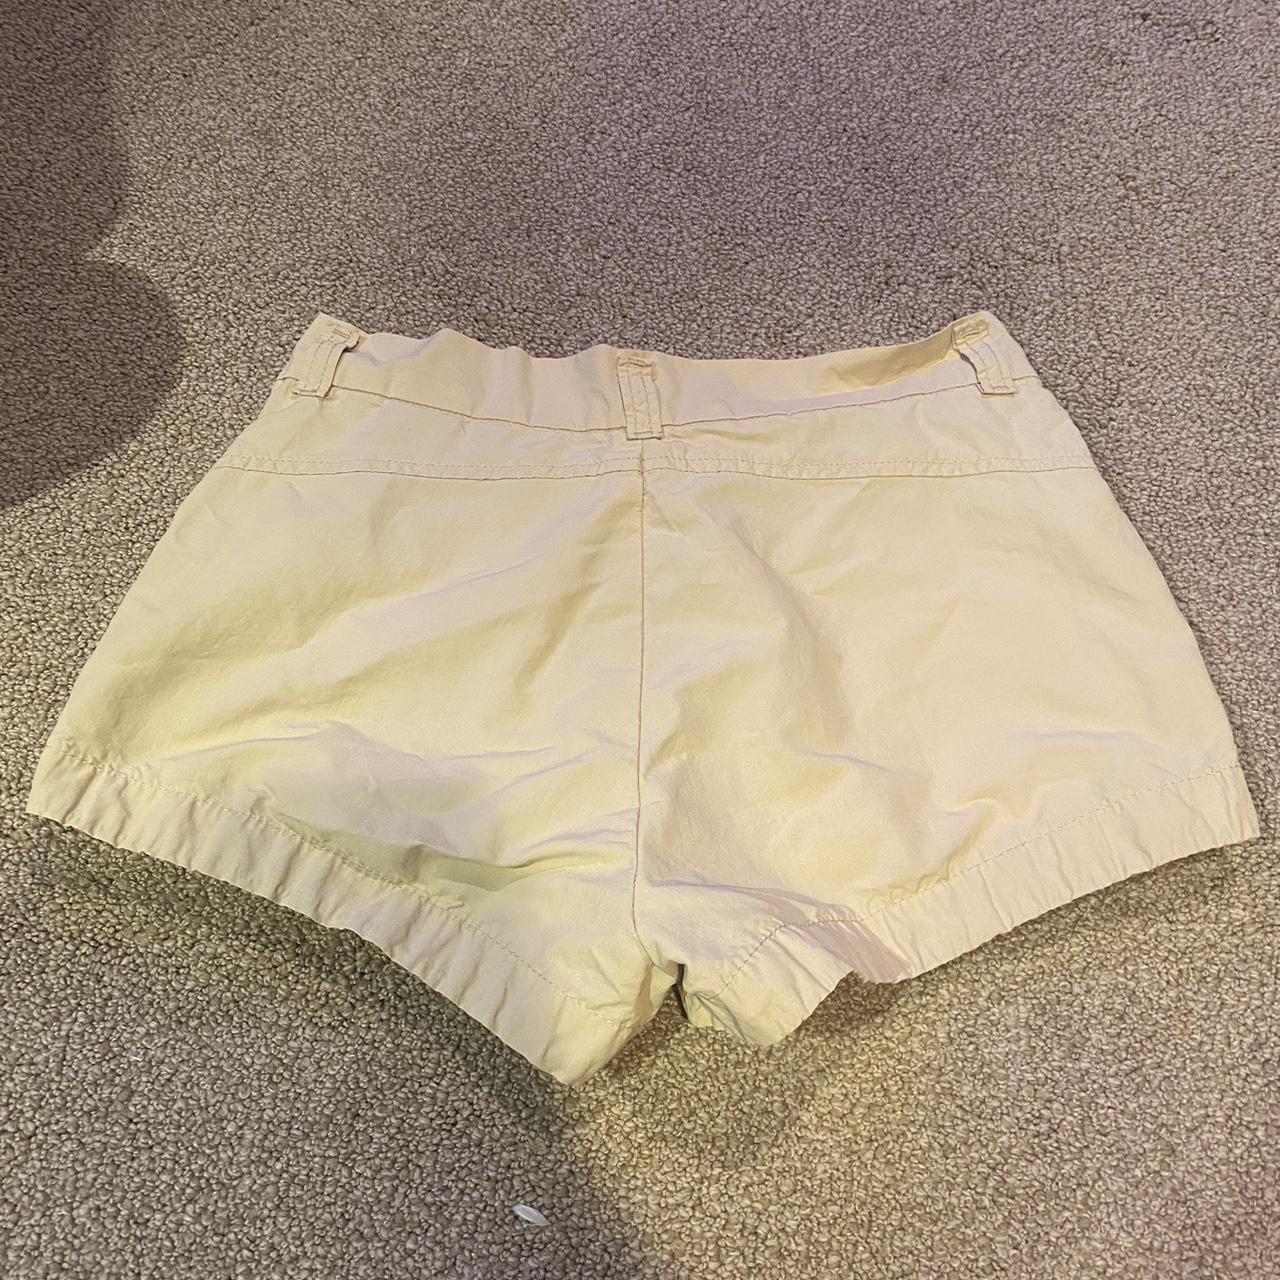 Diesel Red Tag Women's Tan and Cream Shorts (5)